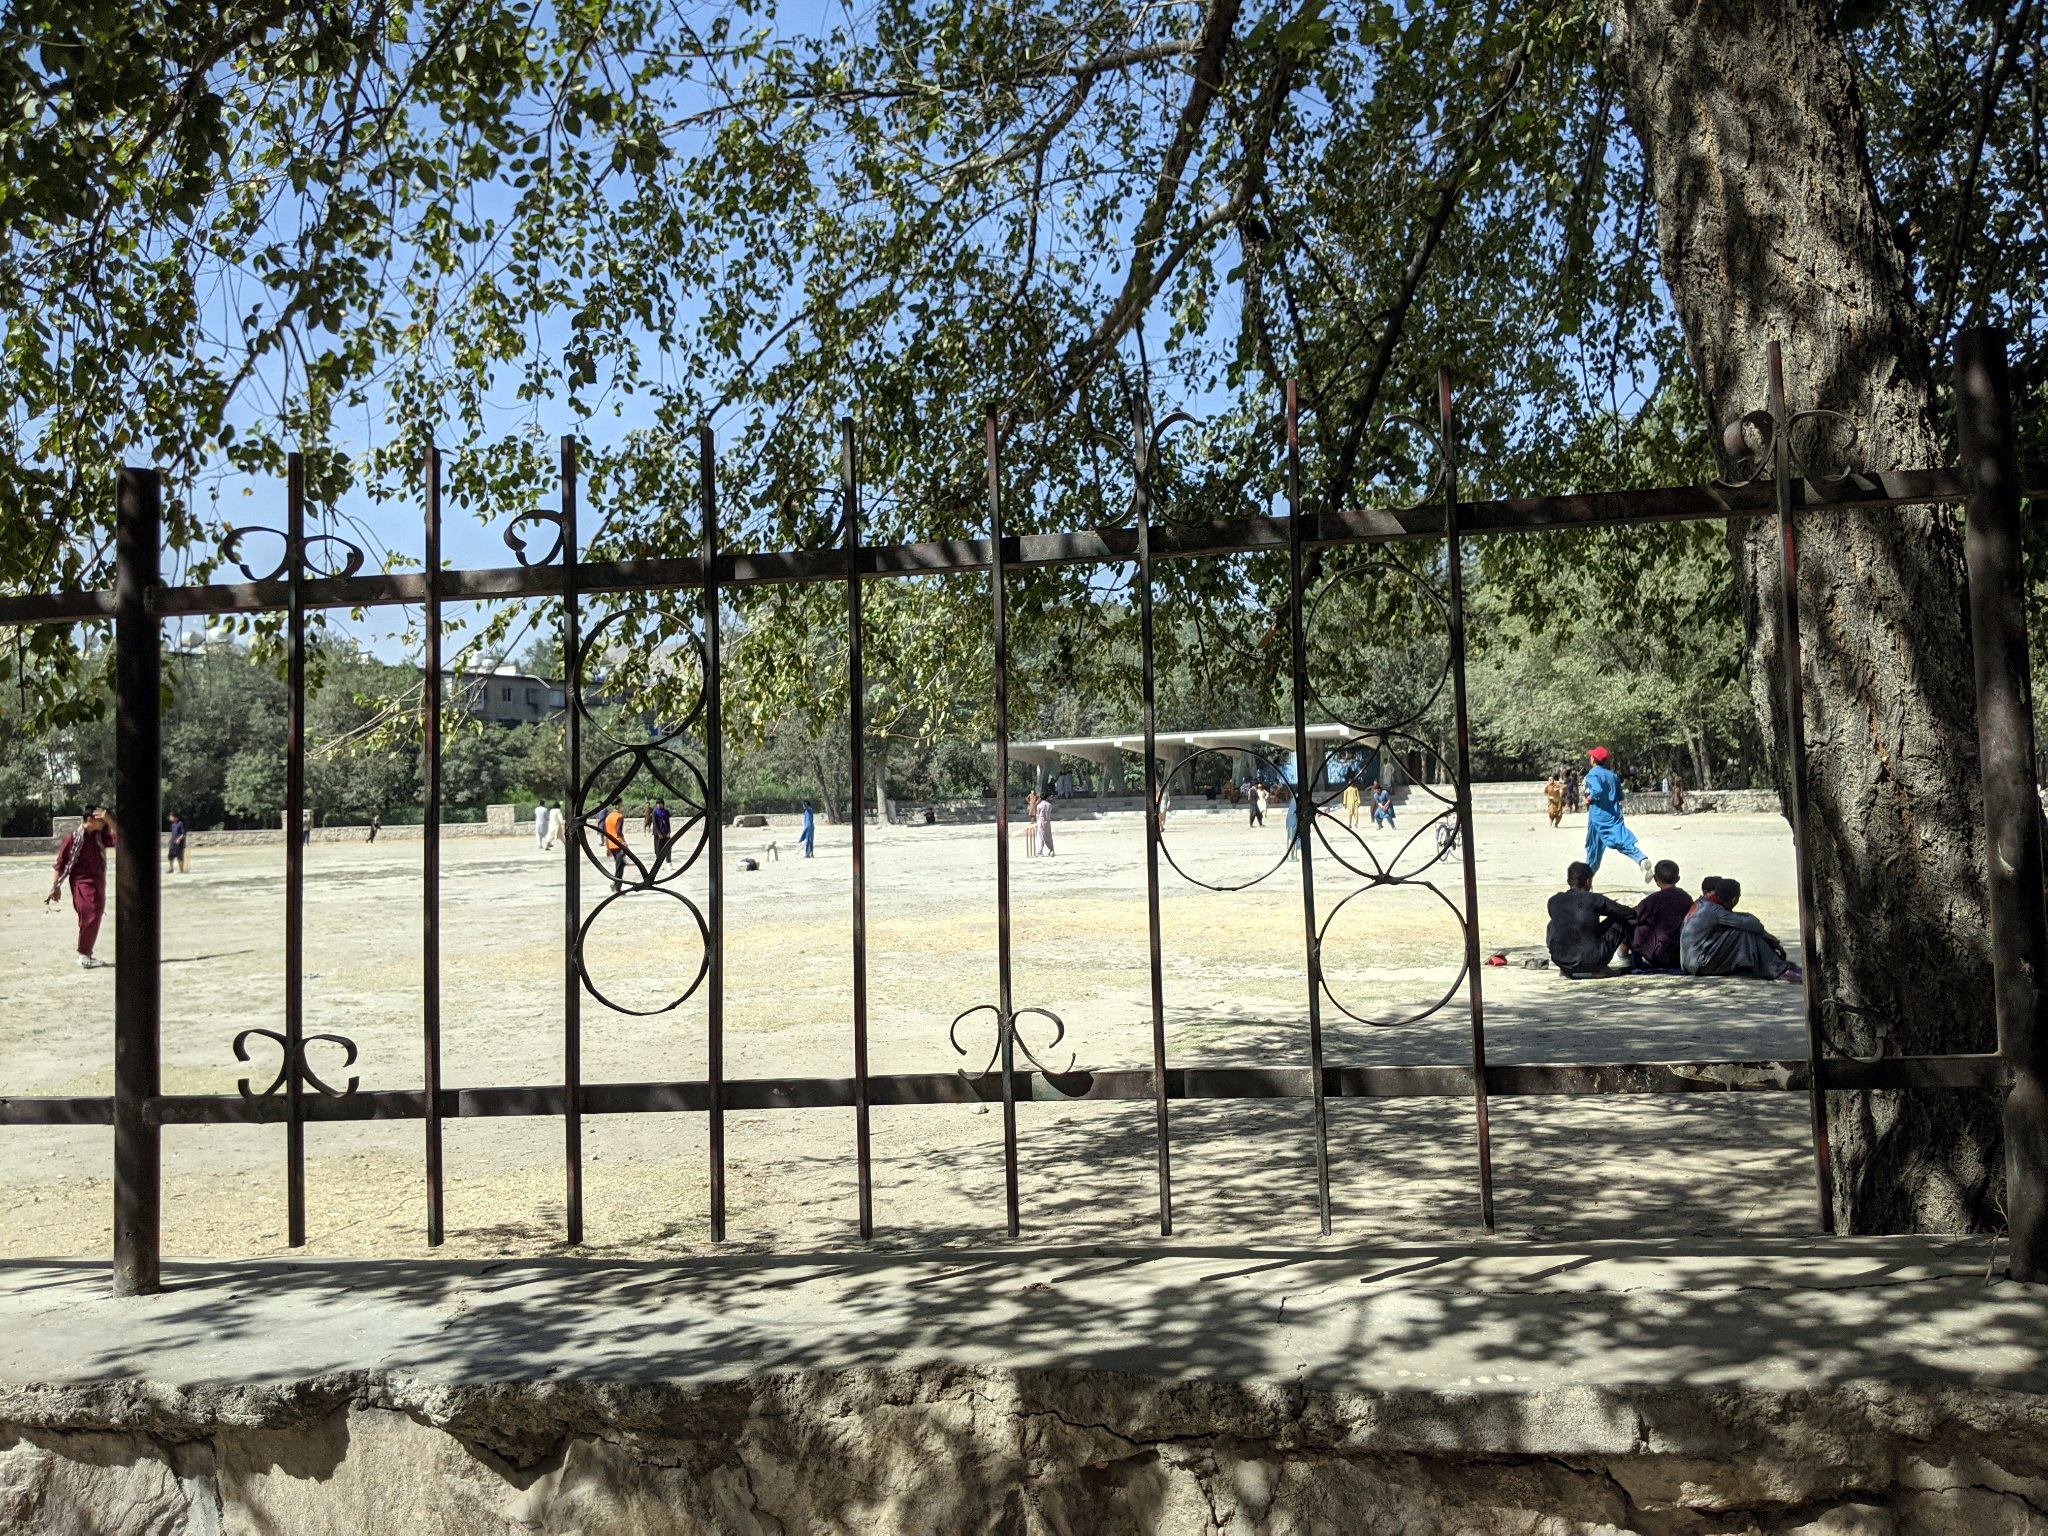 Boys playing cricket in Kabul